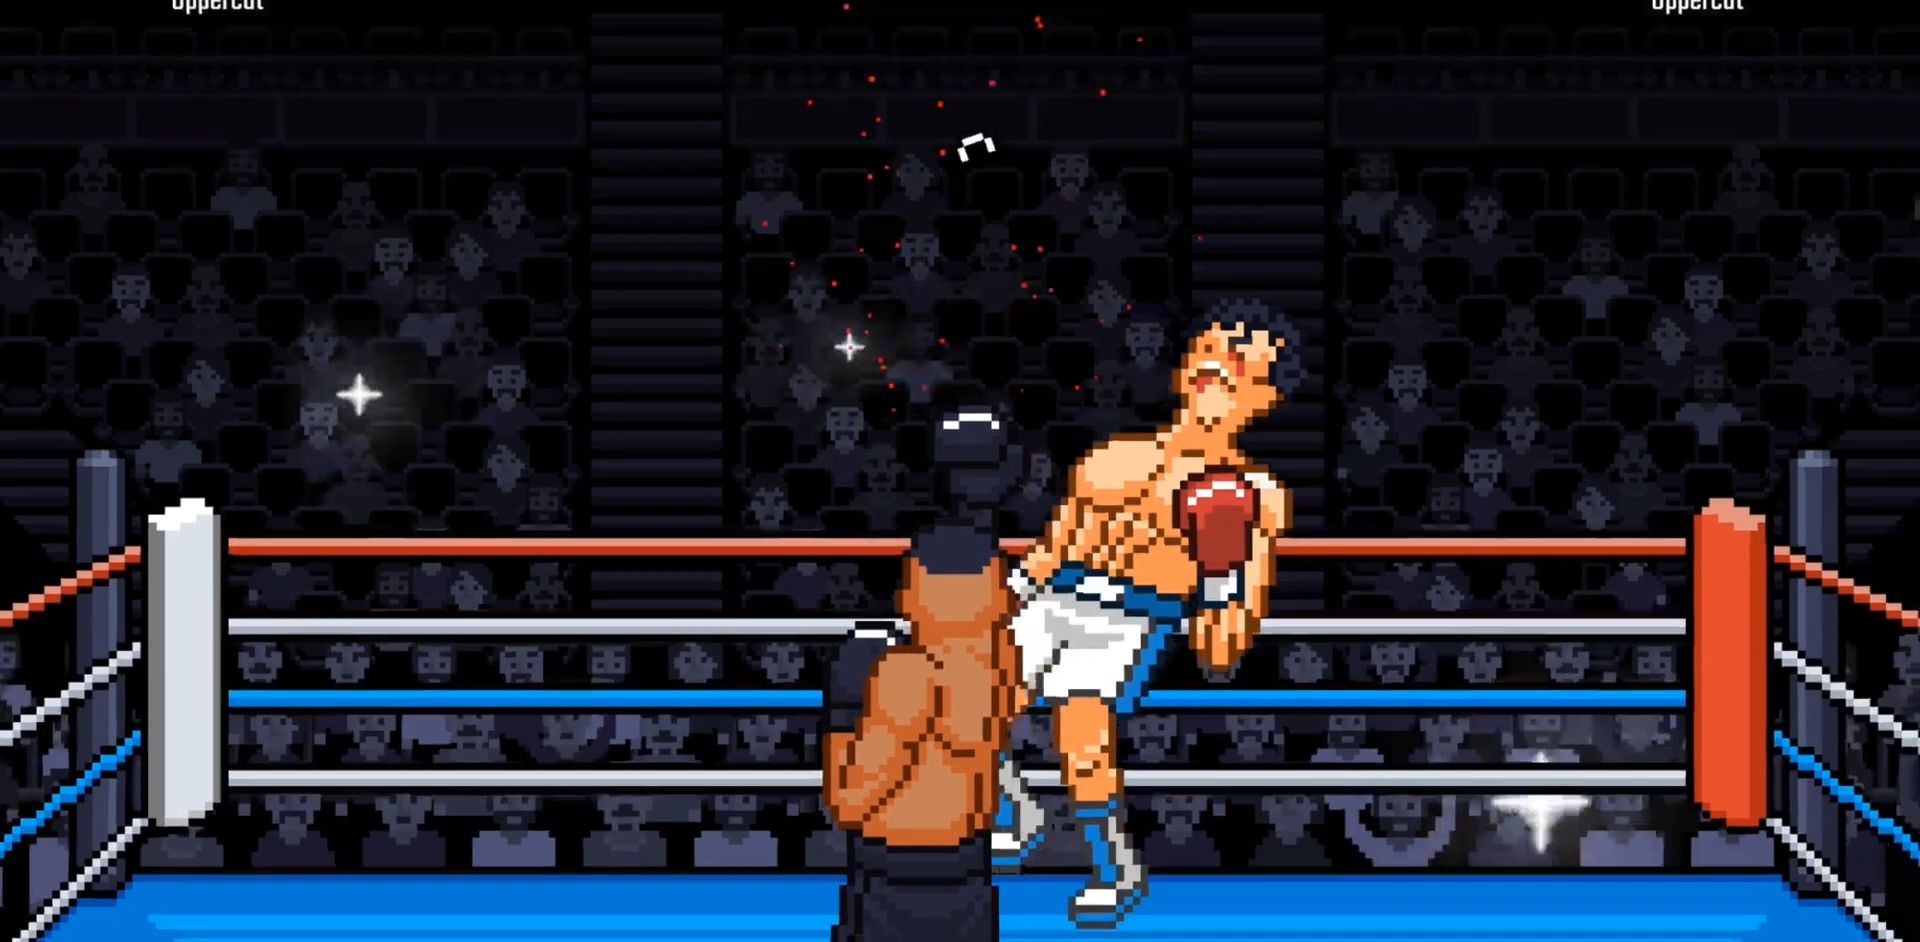 Prizefighters 2 – Apps no Google Play